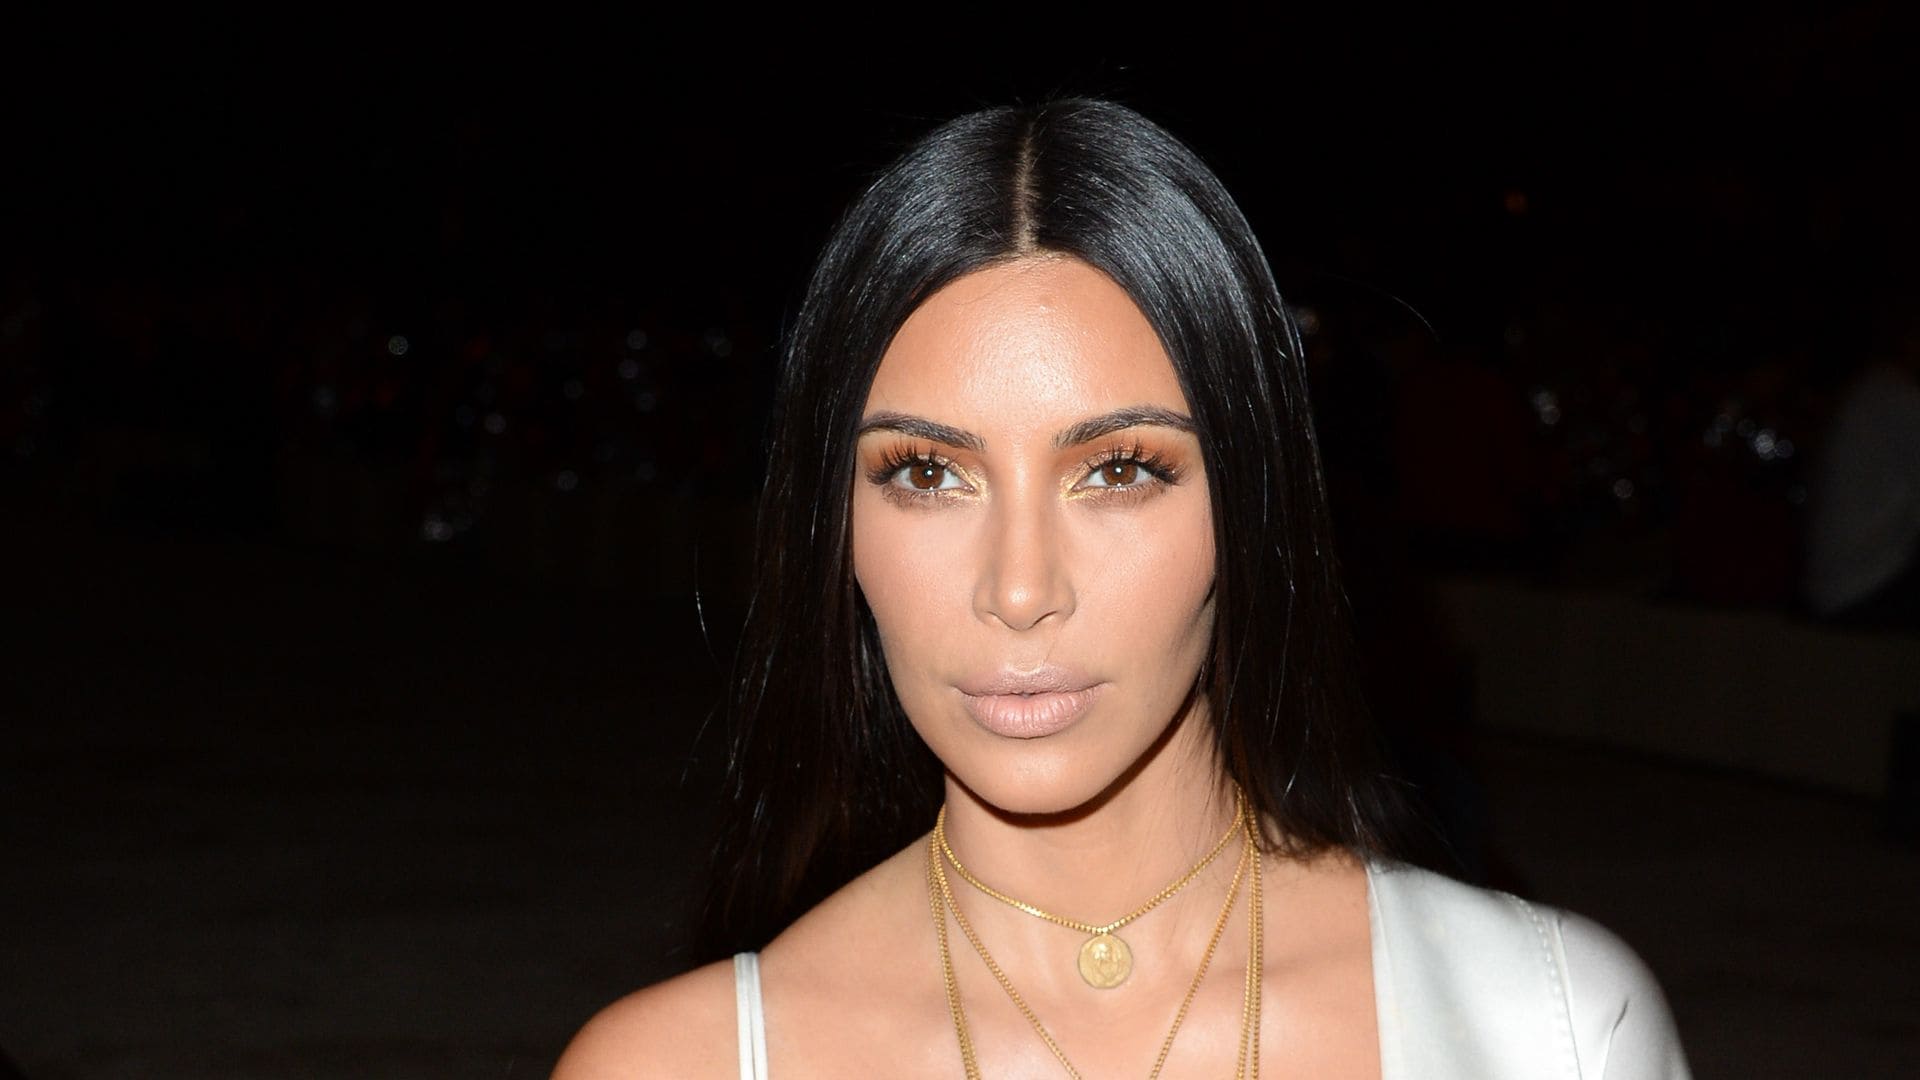 Kim Kardashian called it quits with an unnamed ex; Paris robbery influenced her decisions